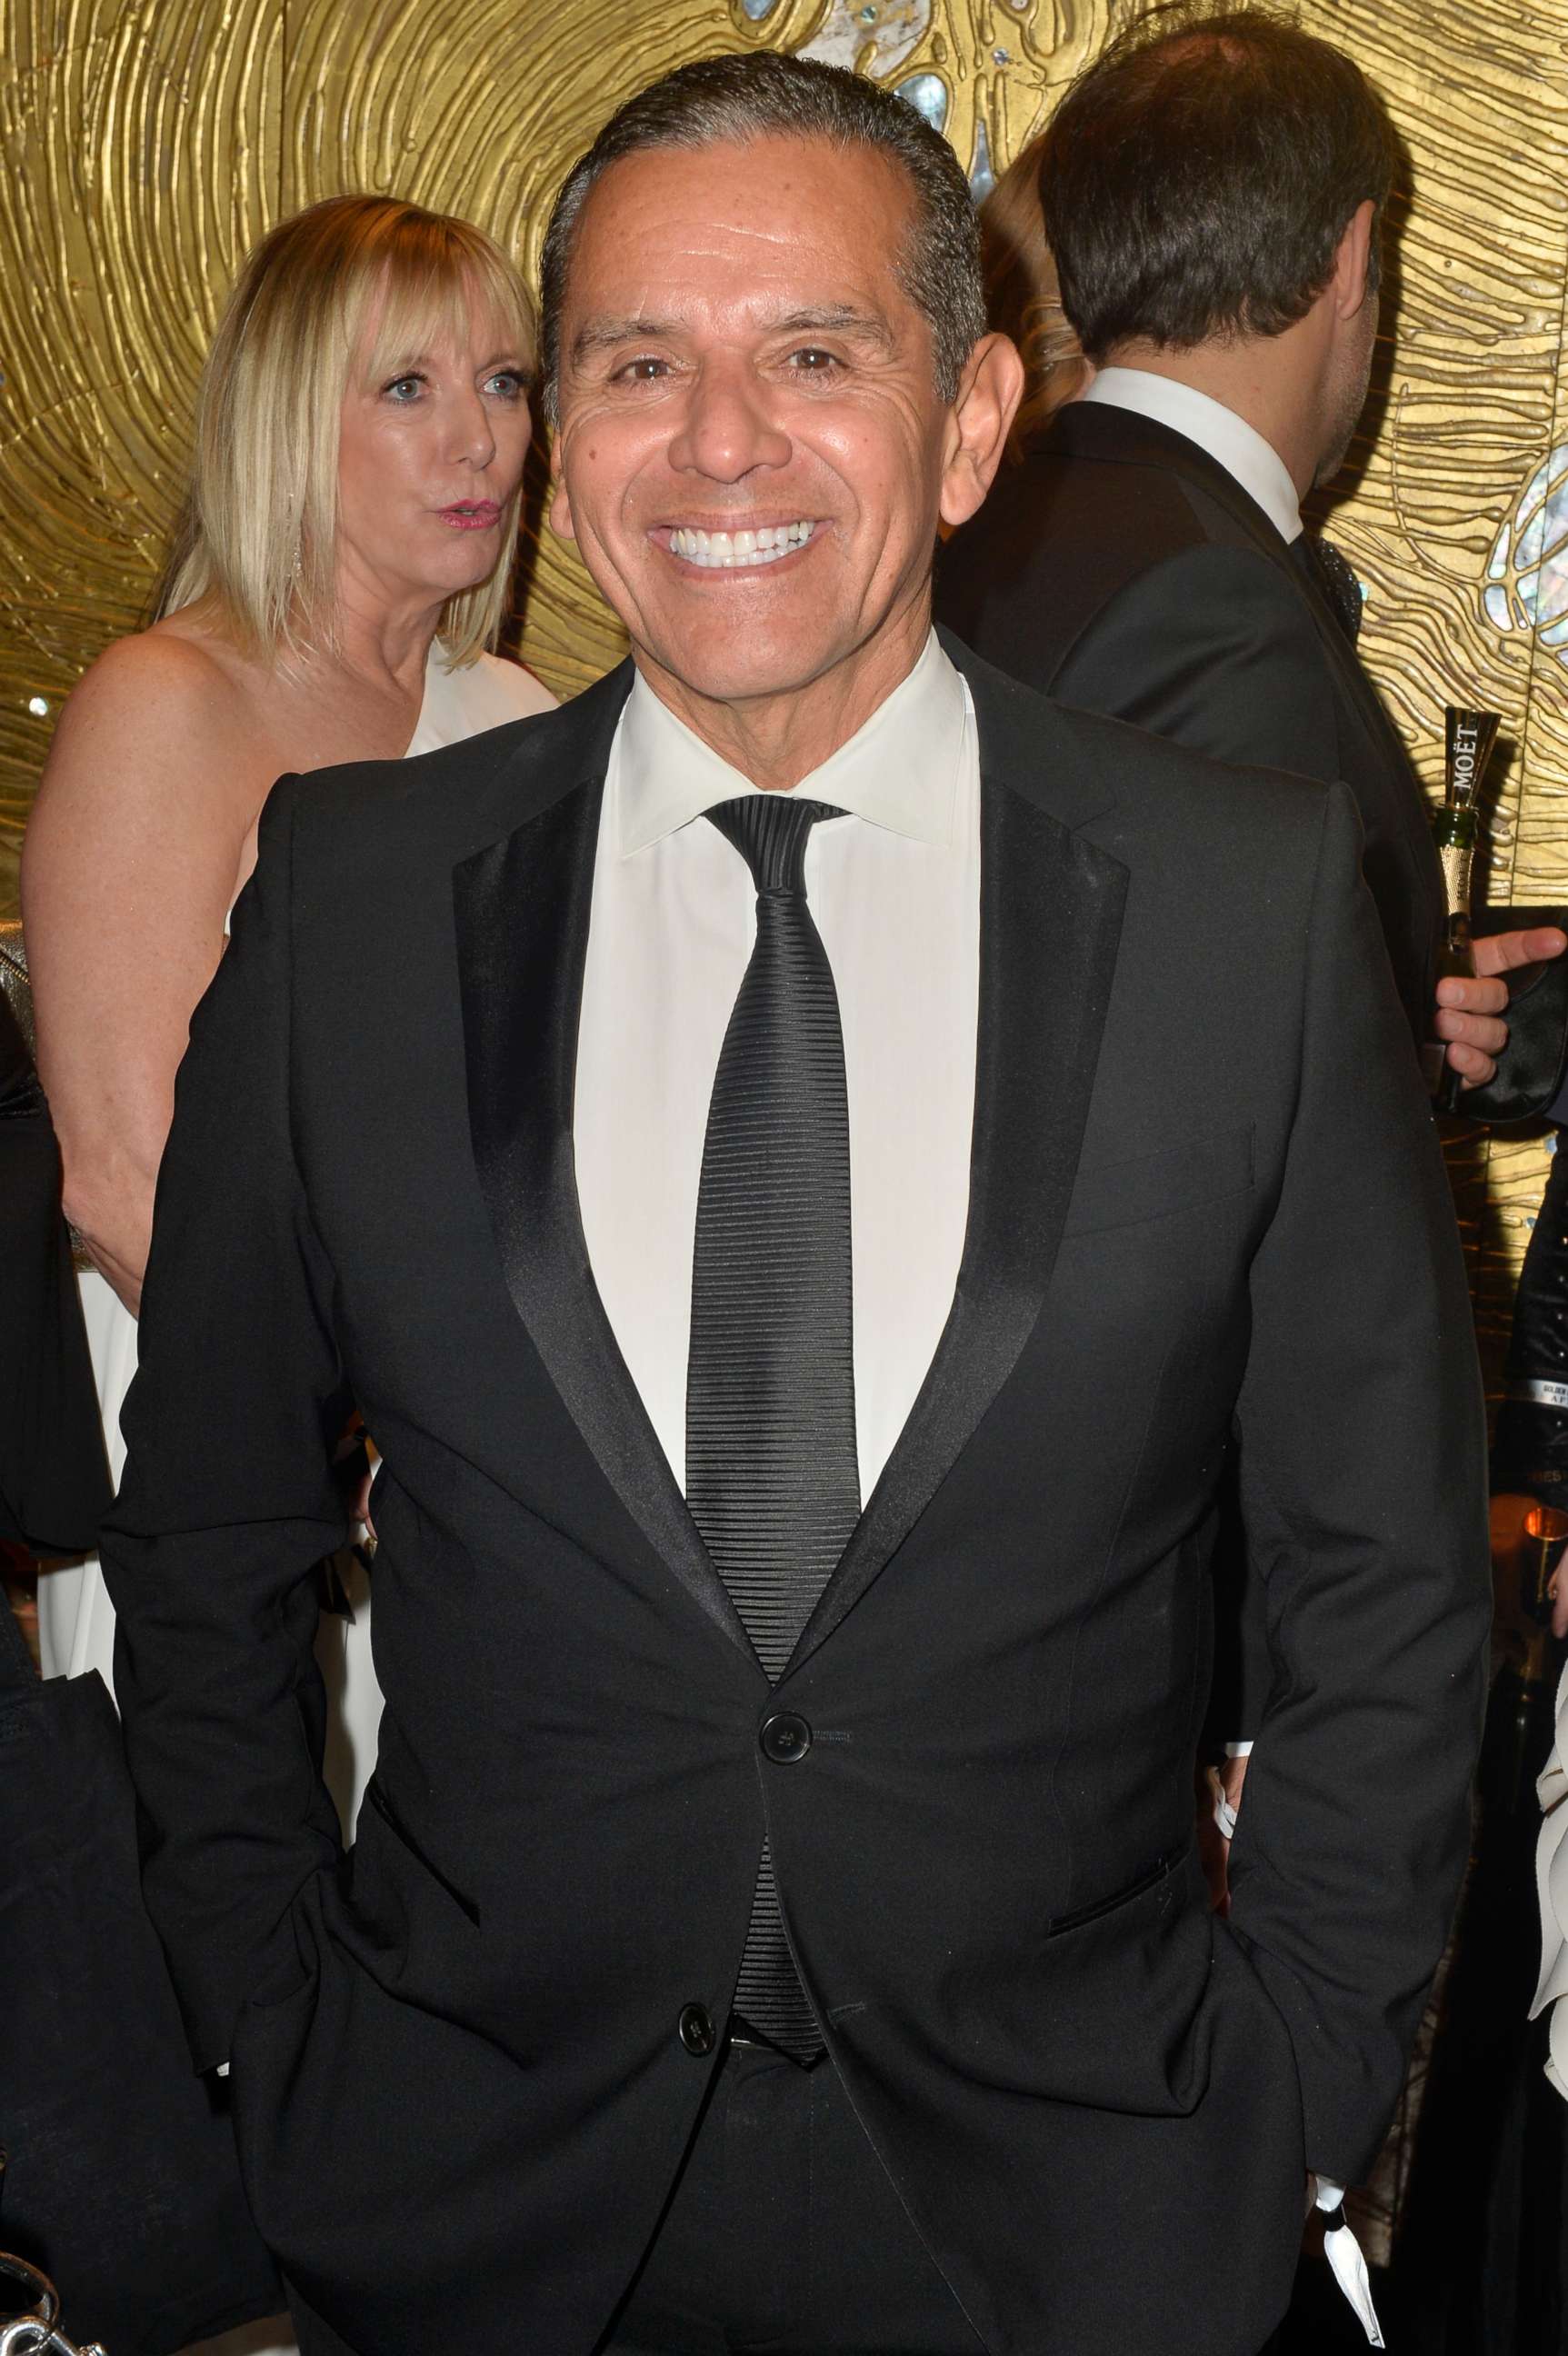 PHOTO: Former Los Angeles Mayor Antonio Villaraigosa attends the Amazon Studios Golden Globes After Party at The Beverly Hilton Hotel on Jan. 5, 2020 in Beverly Hills, Calif.